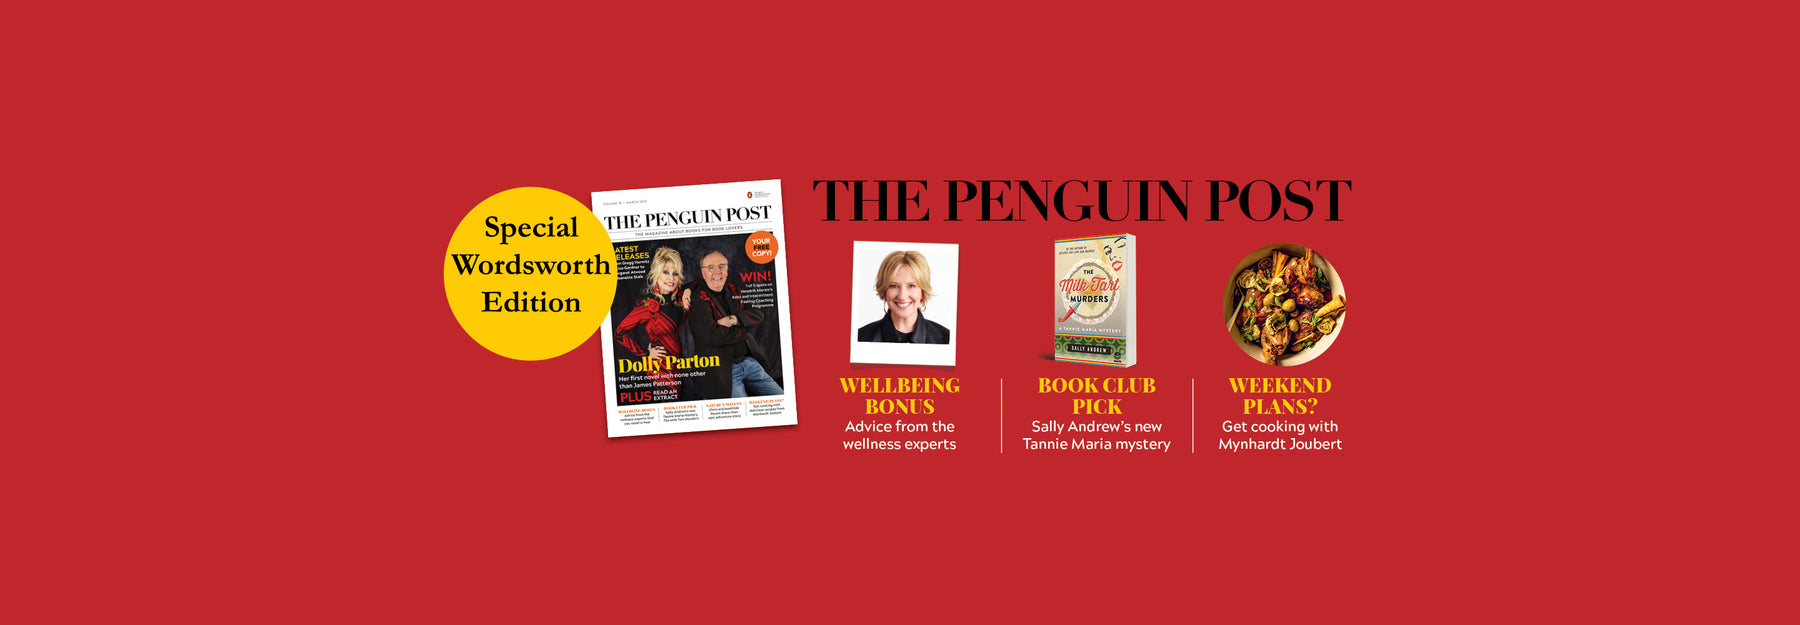 Wordsworth Special Edition of the Penguin Post for March